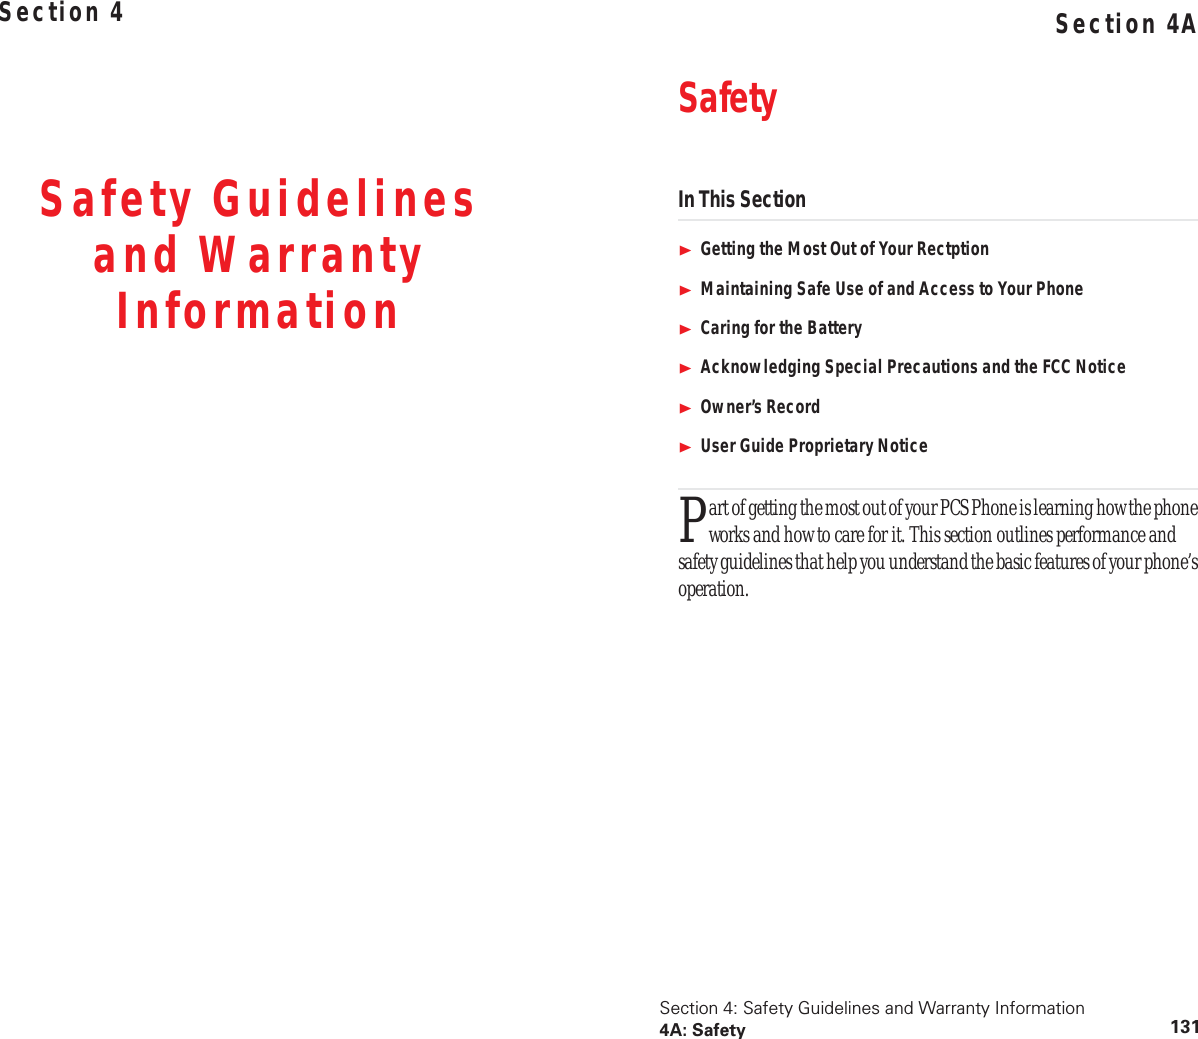 Section 4Safety Guidelines and Warranty InformationSection 4: Safety Guidelines and Warranty Information4A: Safety 131Section 4ASafetyIn This SectionGetting the Most Out of Your RectptionMaintaining Safe Use of and Access to Your PhoneCaring for the BatteryAcknowledging Special Precautions and the FCC NoticeOwner’s RecordUser Guide Proprietary Noticeart of getting the most out of your PCS Phone is learning how the phone works and how to care for it. This section outlines performance and safety guidelines that help you understand the basic features of your phone’s operation.P